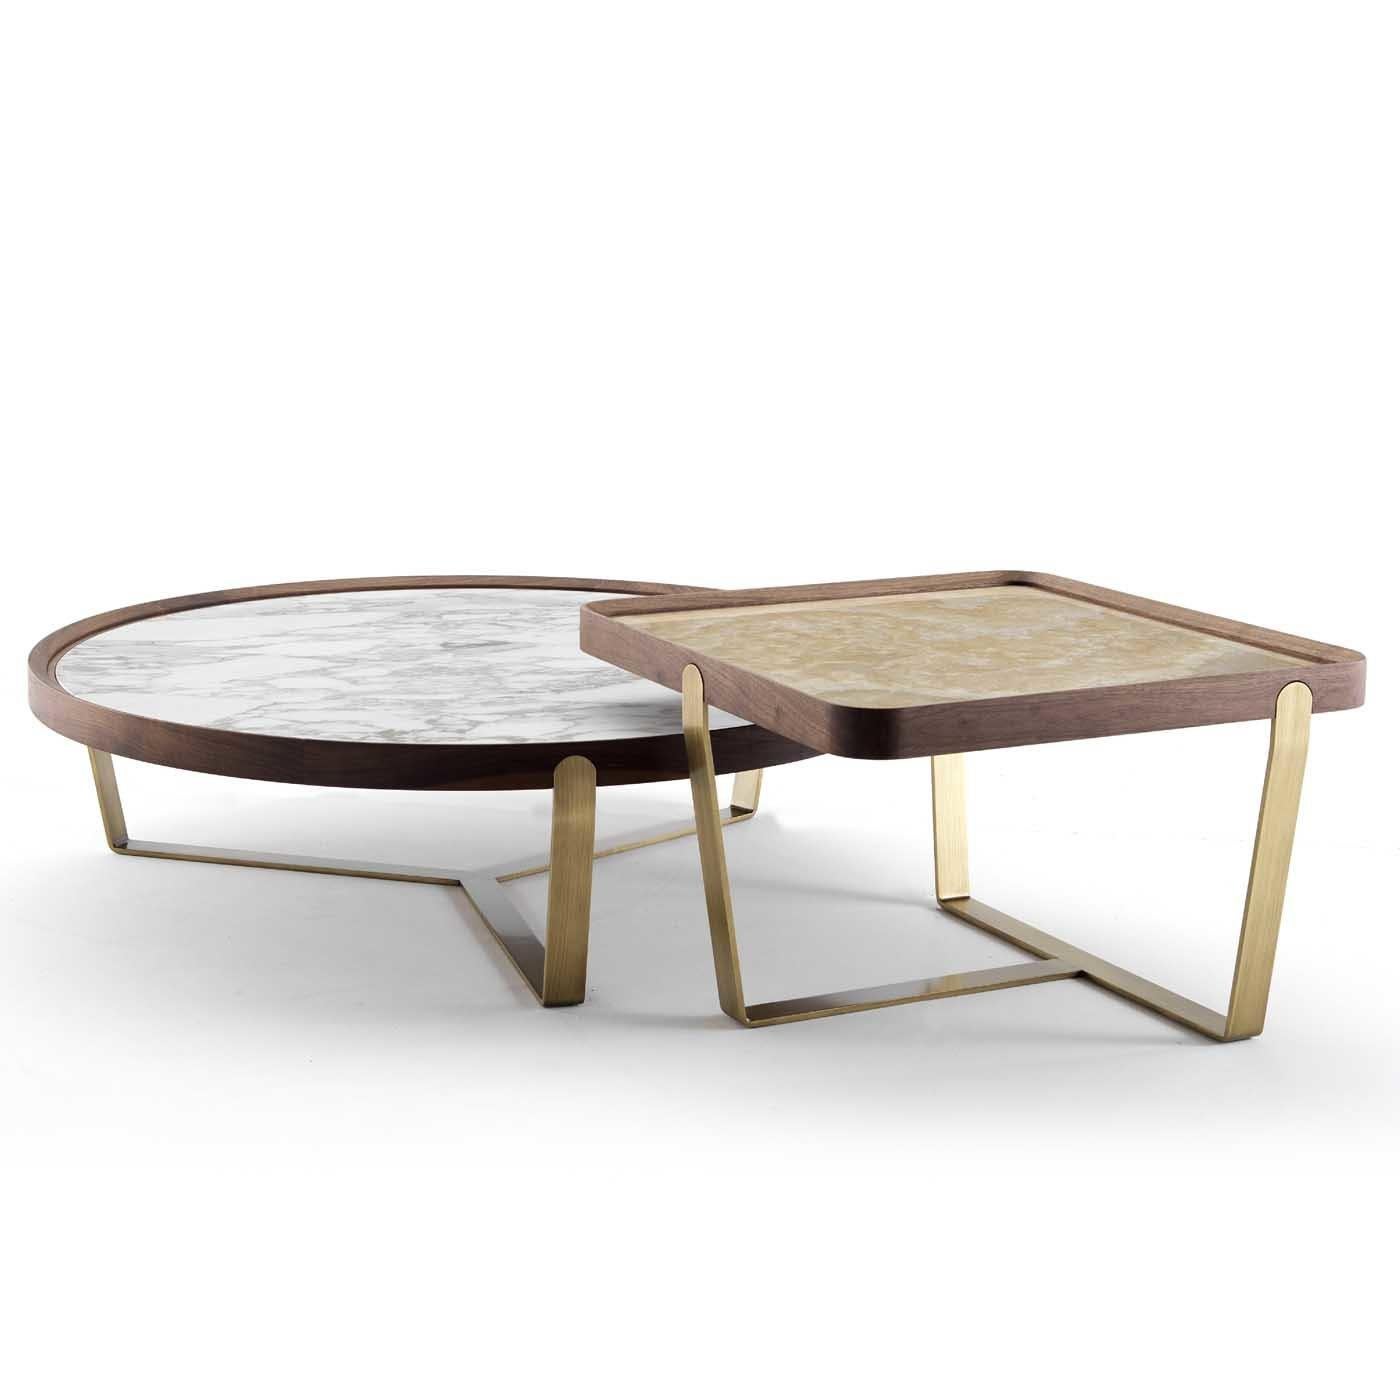 This stunning coffee table is a superb object of functional decor that will display everyday objects or collectibles, while also enriching a modern living room with the elegant combination of its refined materials. The silhouette comprises an